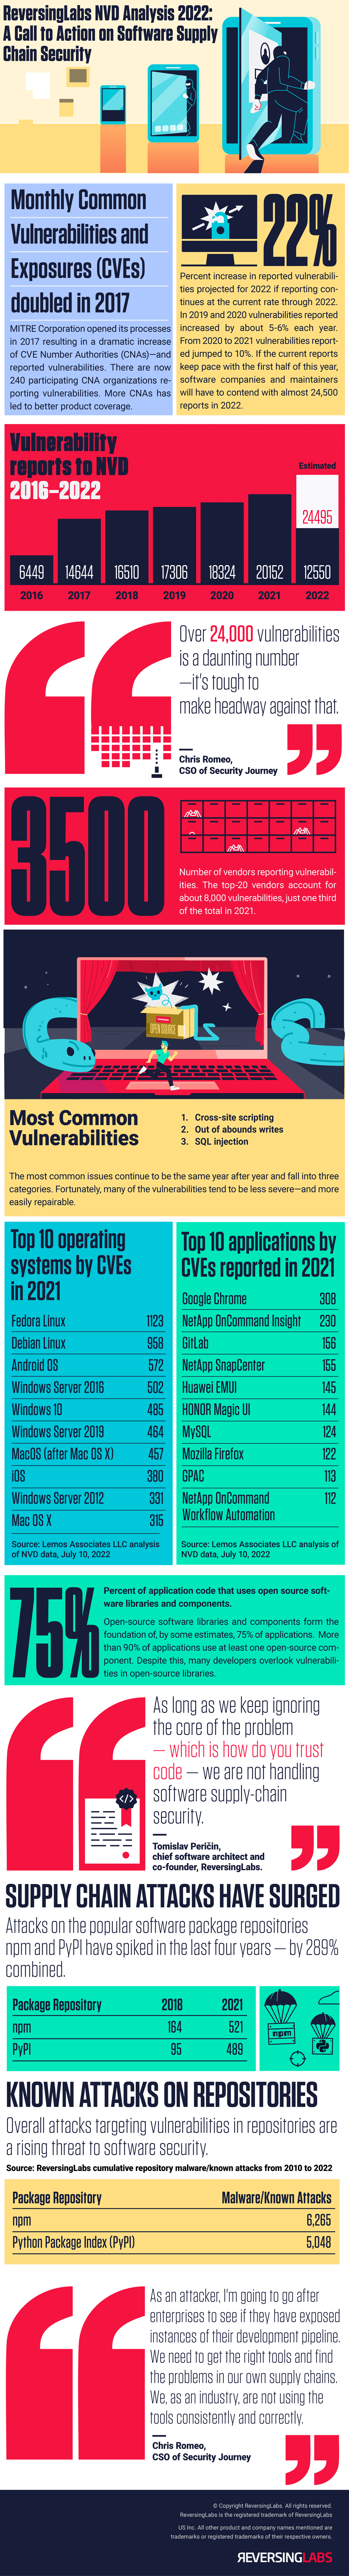 Infographic-ReversingLabs-NVD-Analysis-2022-A-Call-to-Action-on-Software-Supply-Chain-Security (1)